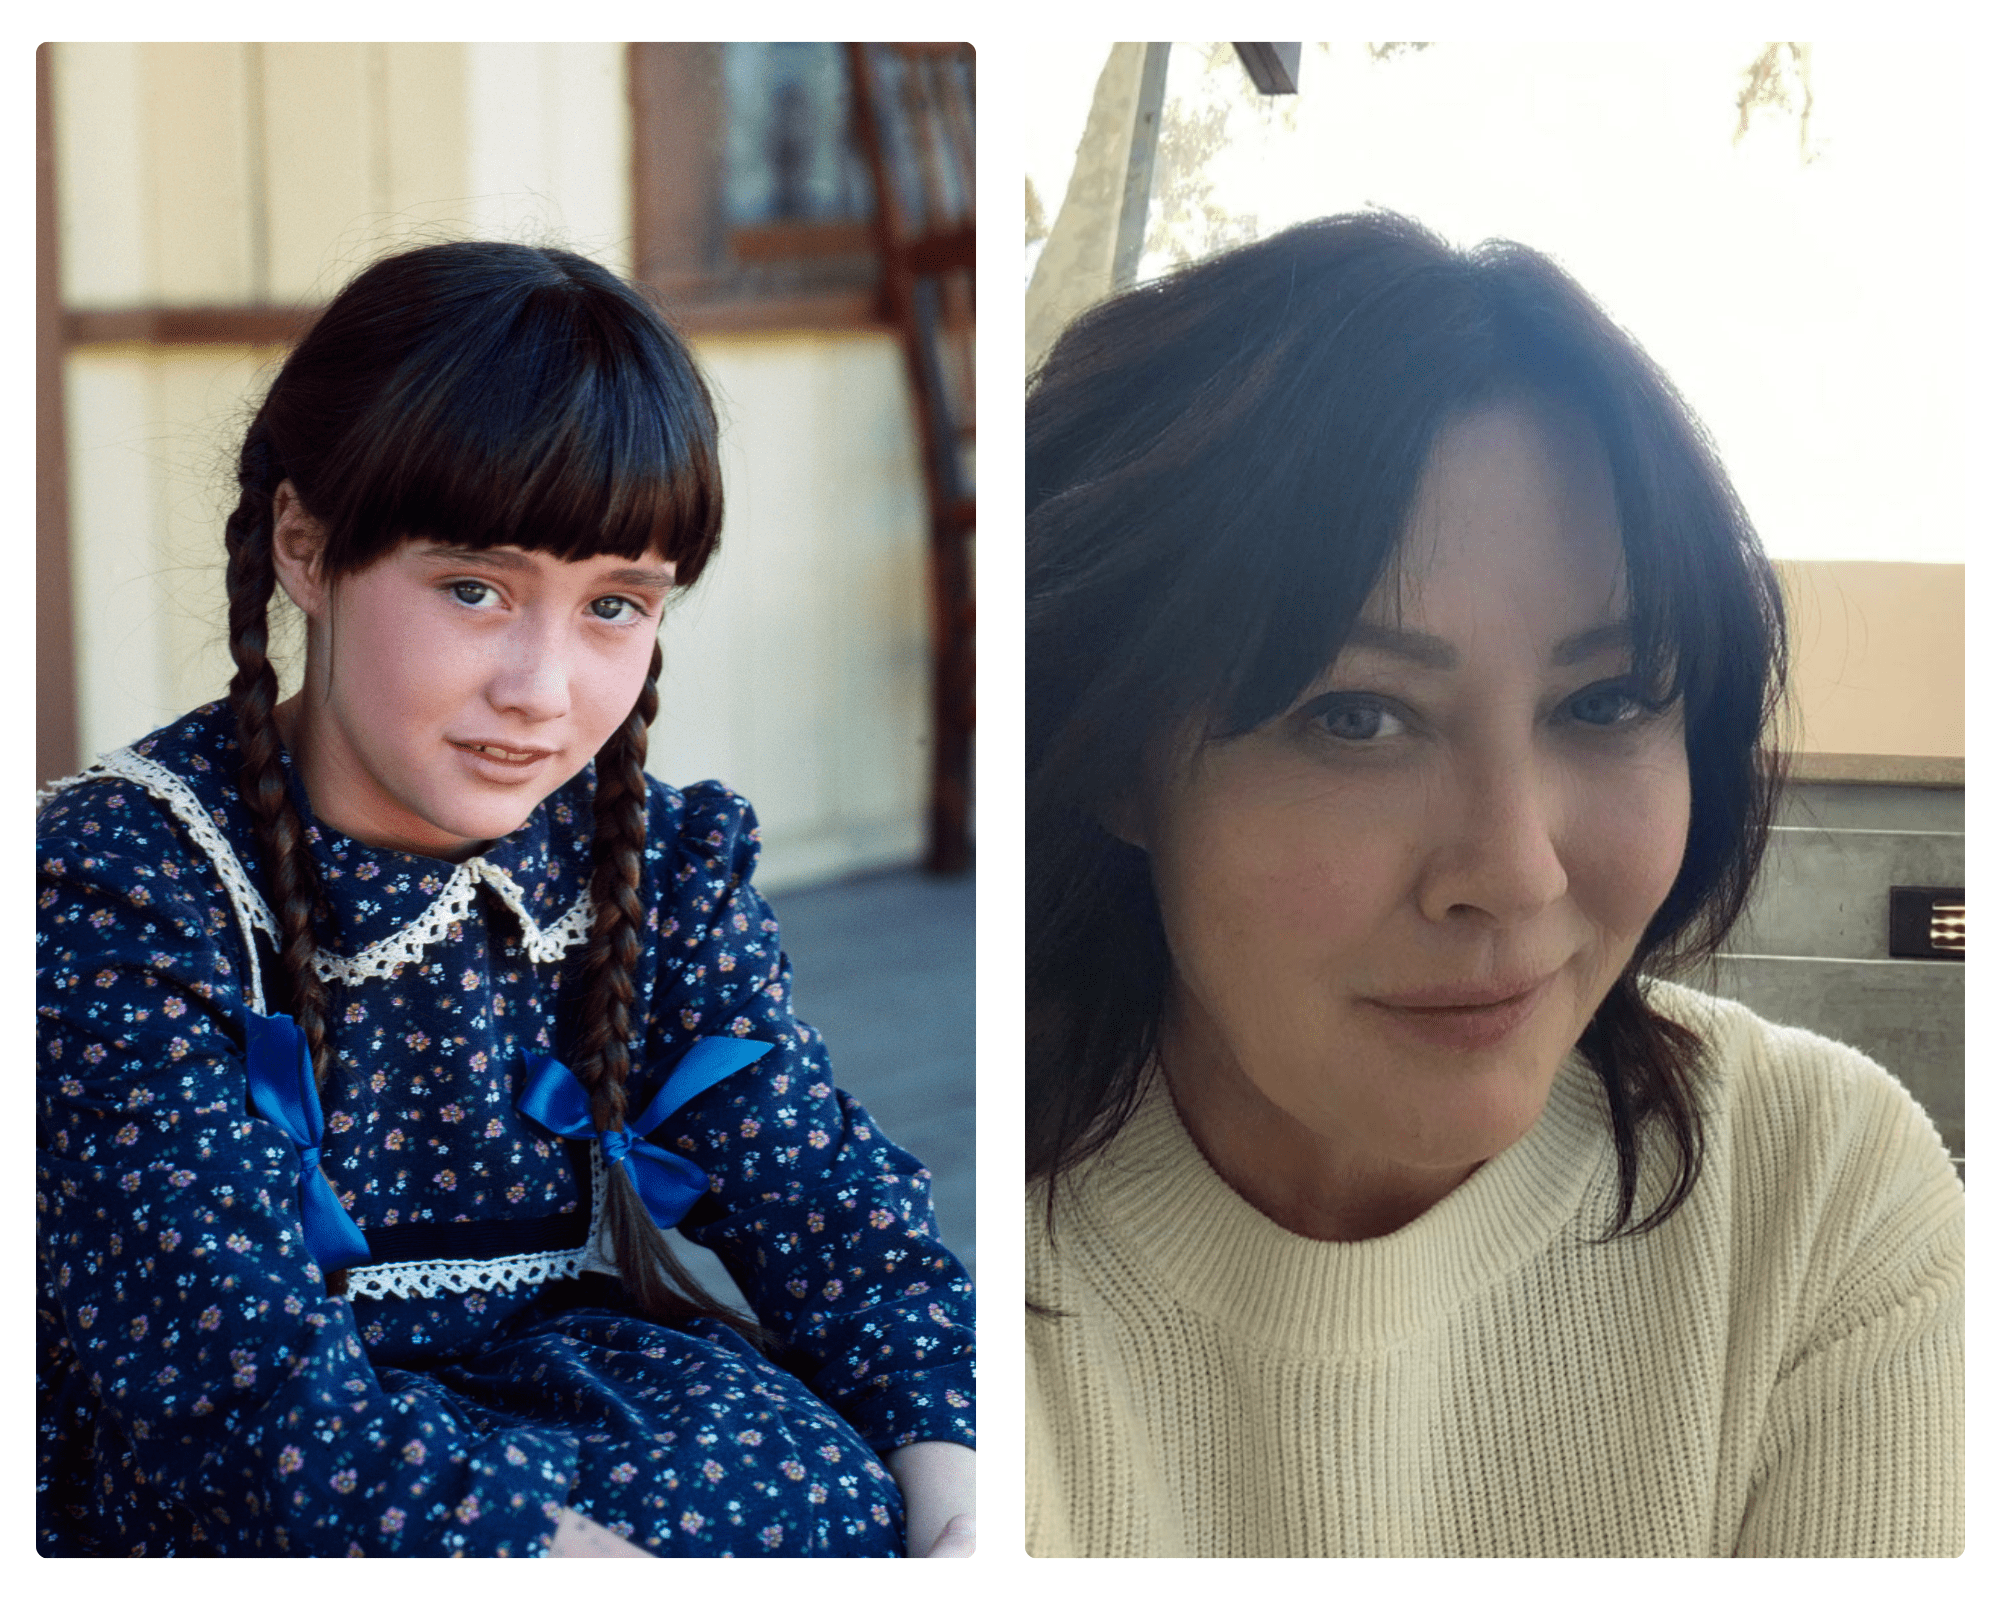 Shannen Doherty | Source: Getty Images | Instagram.com/Shannen Doherty